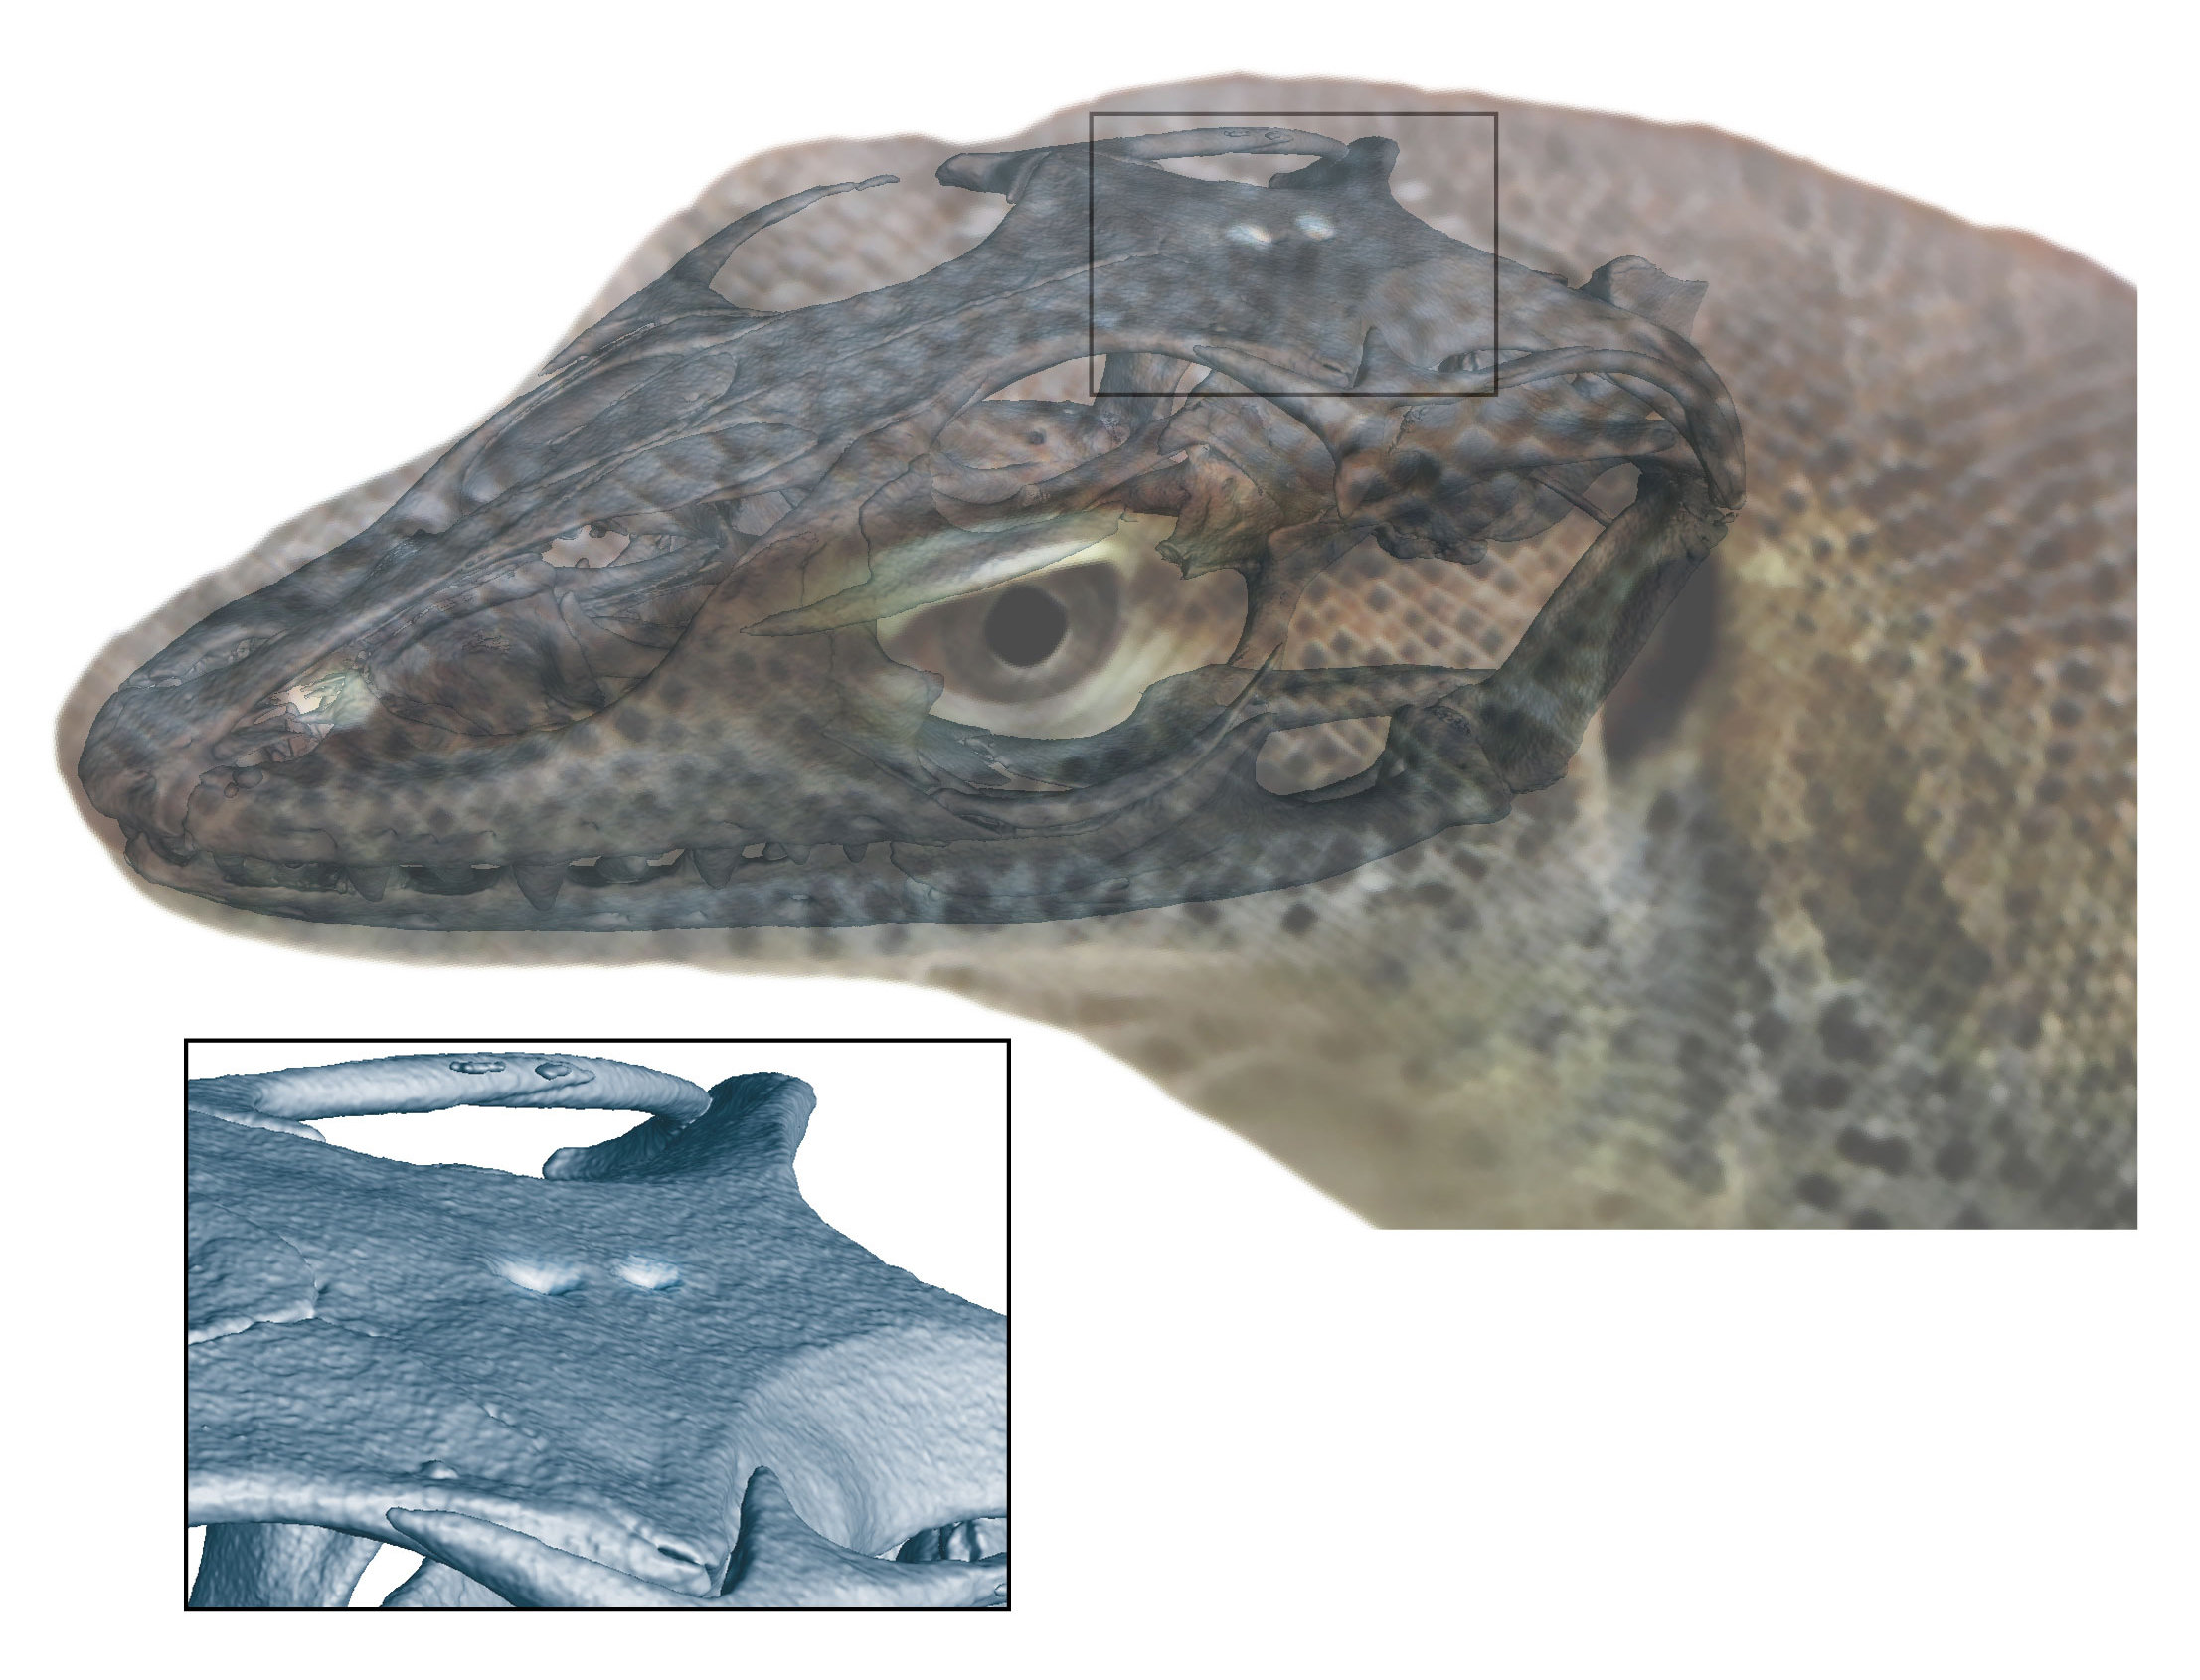 Extinct monitor lizard had four eyes, fossil evidence shows